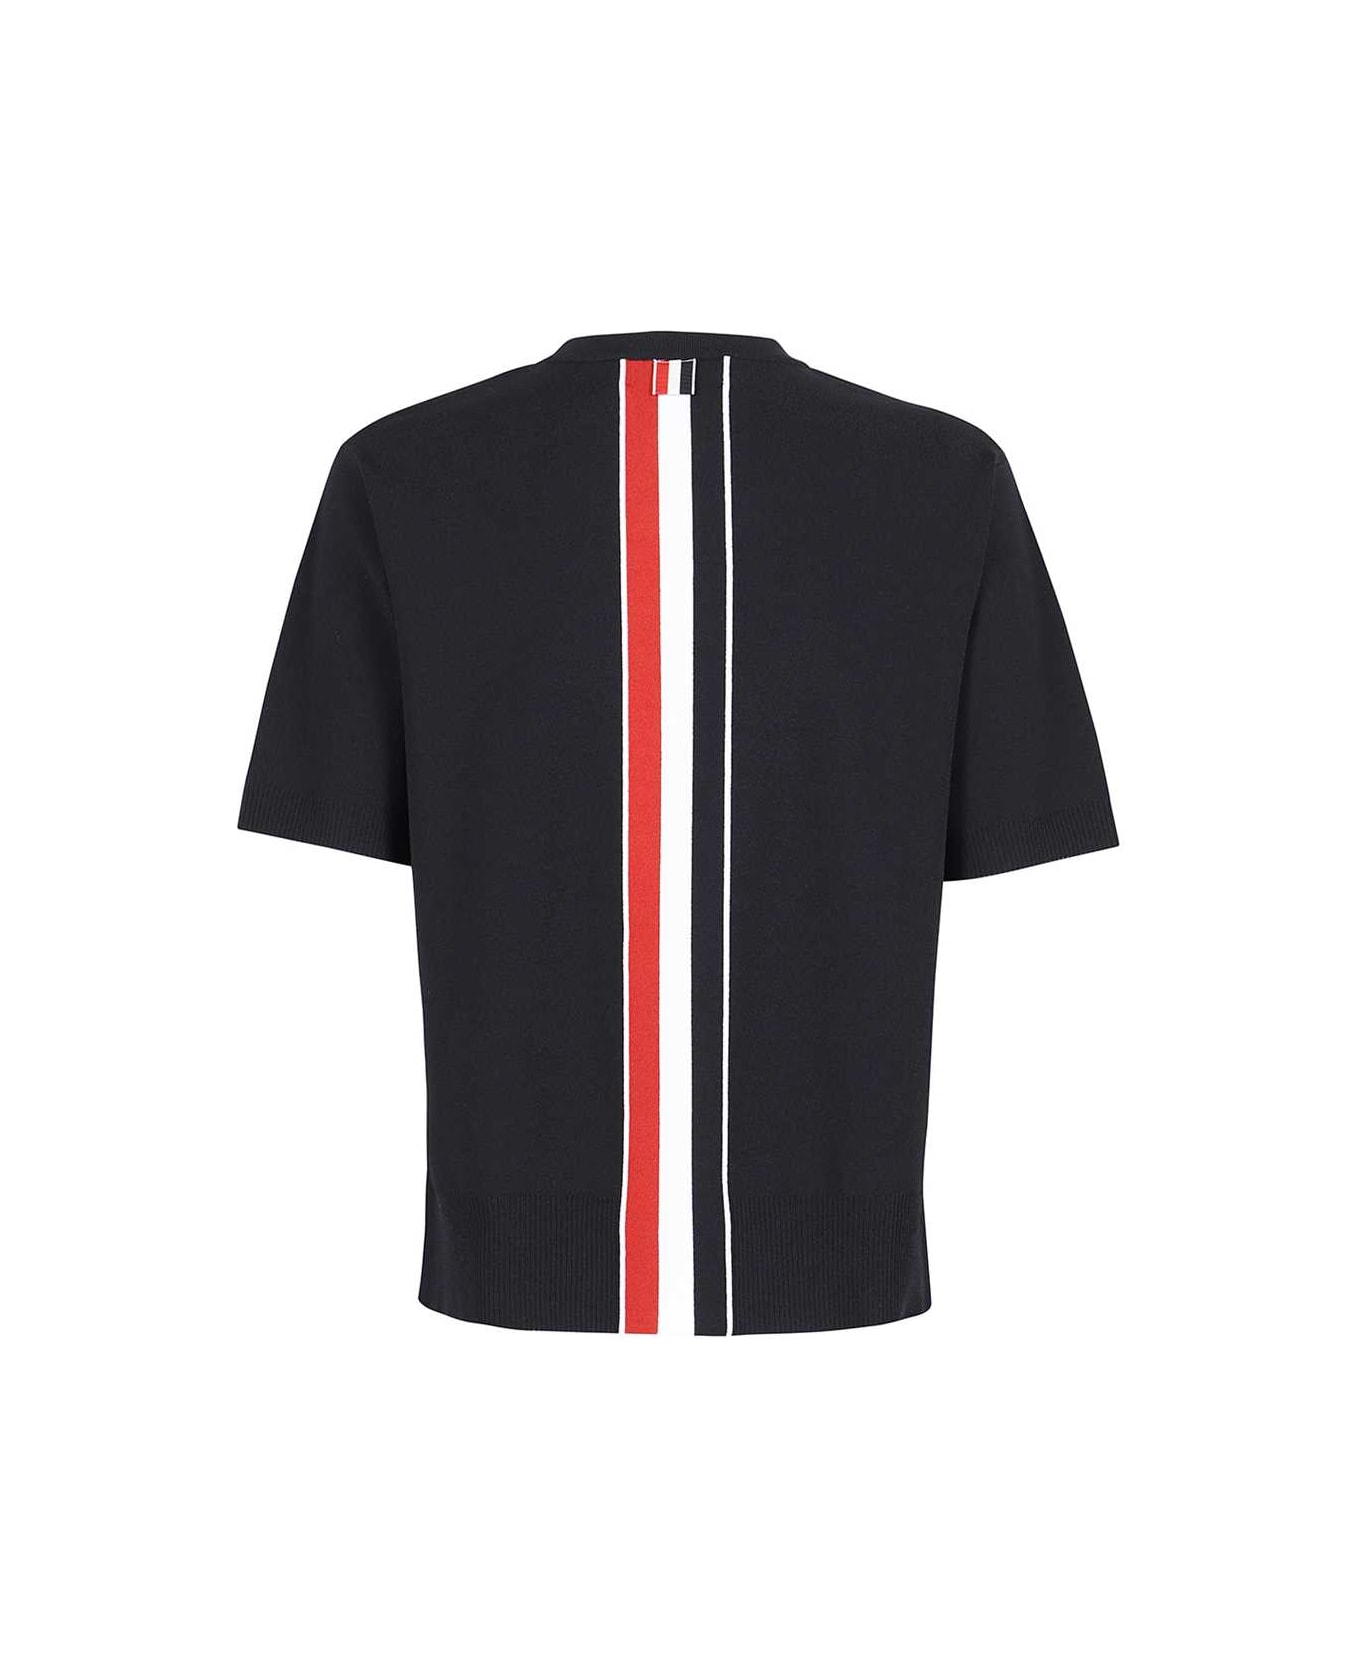 Thom Browne Knitted T-shirt - blue